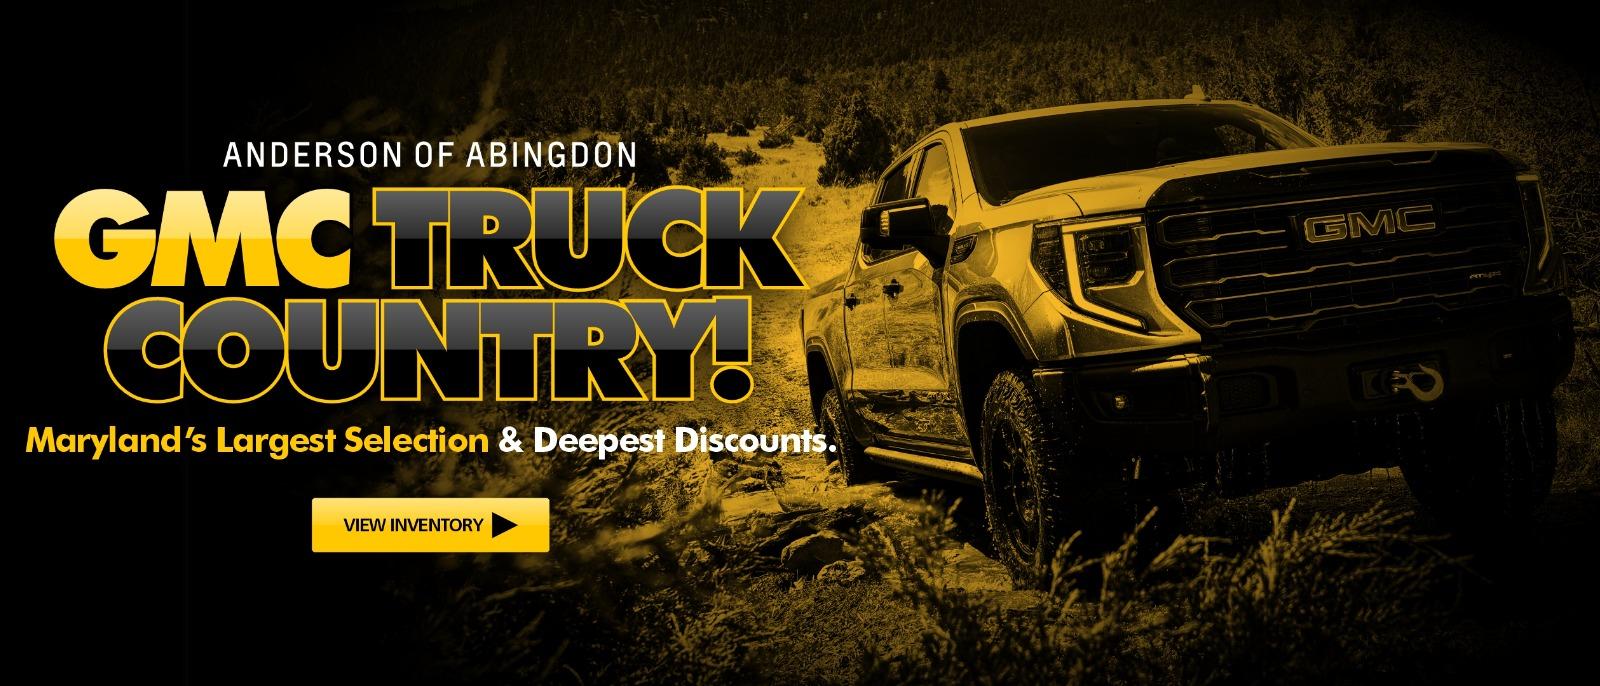 GMC Truck Country - Maryland's Largest Selection & Deepest Discounts